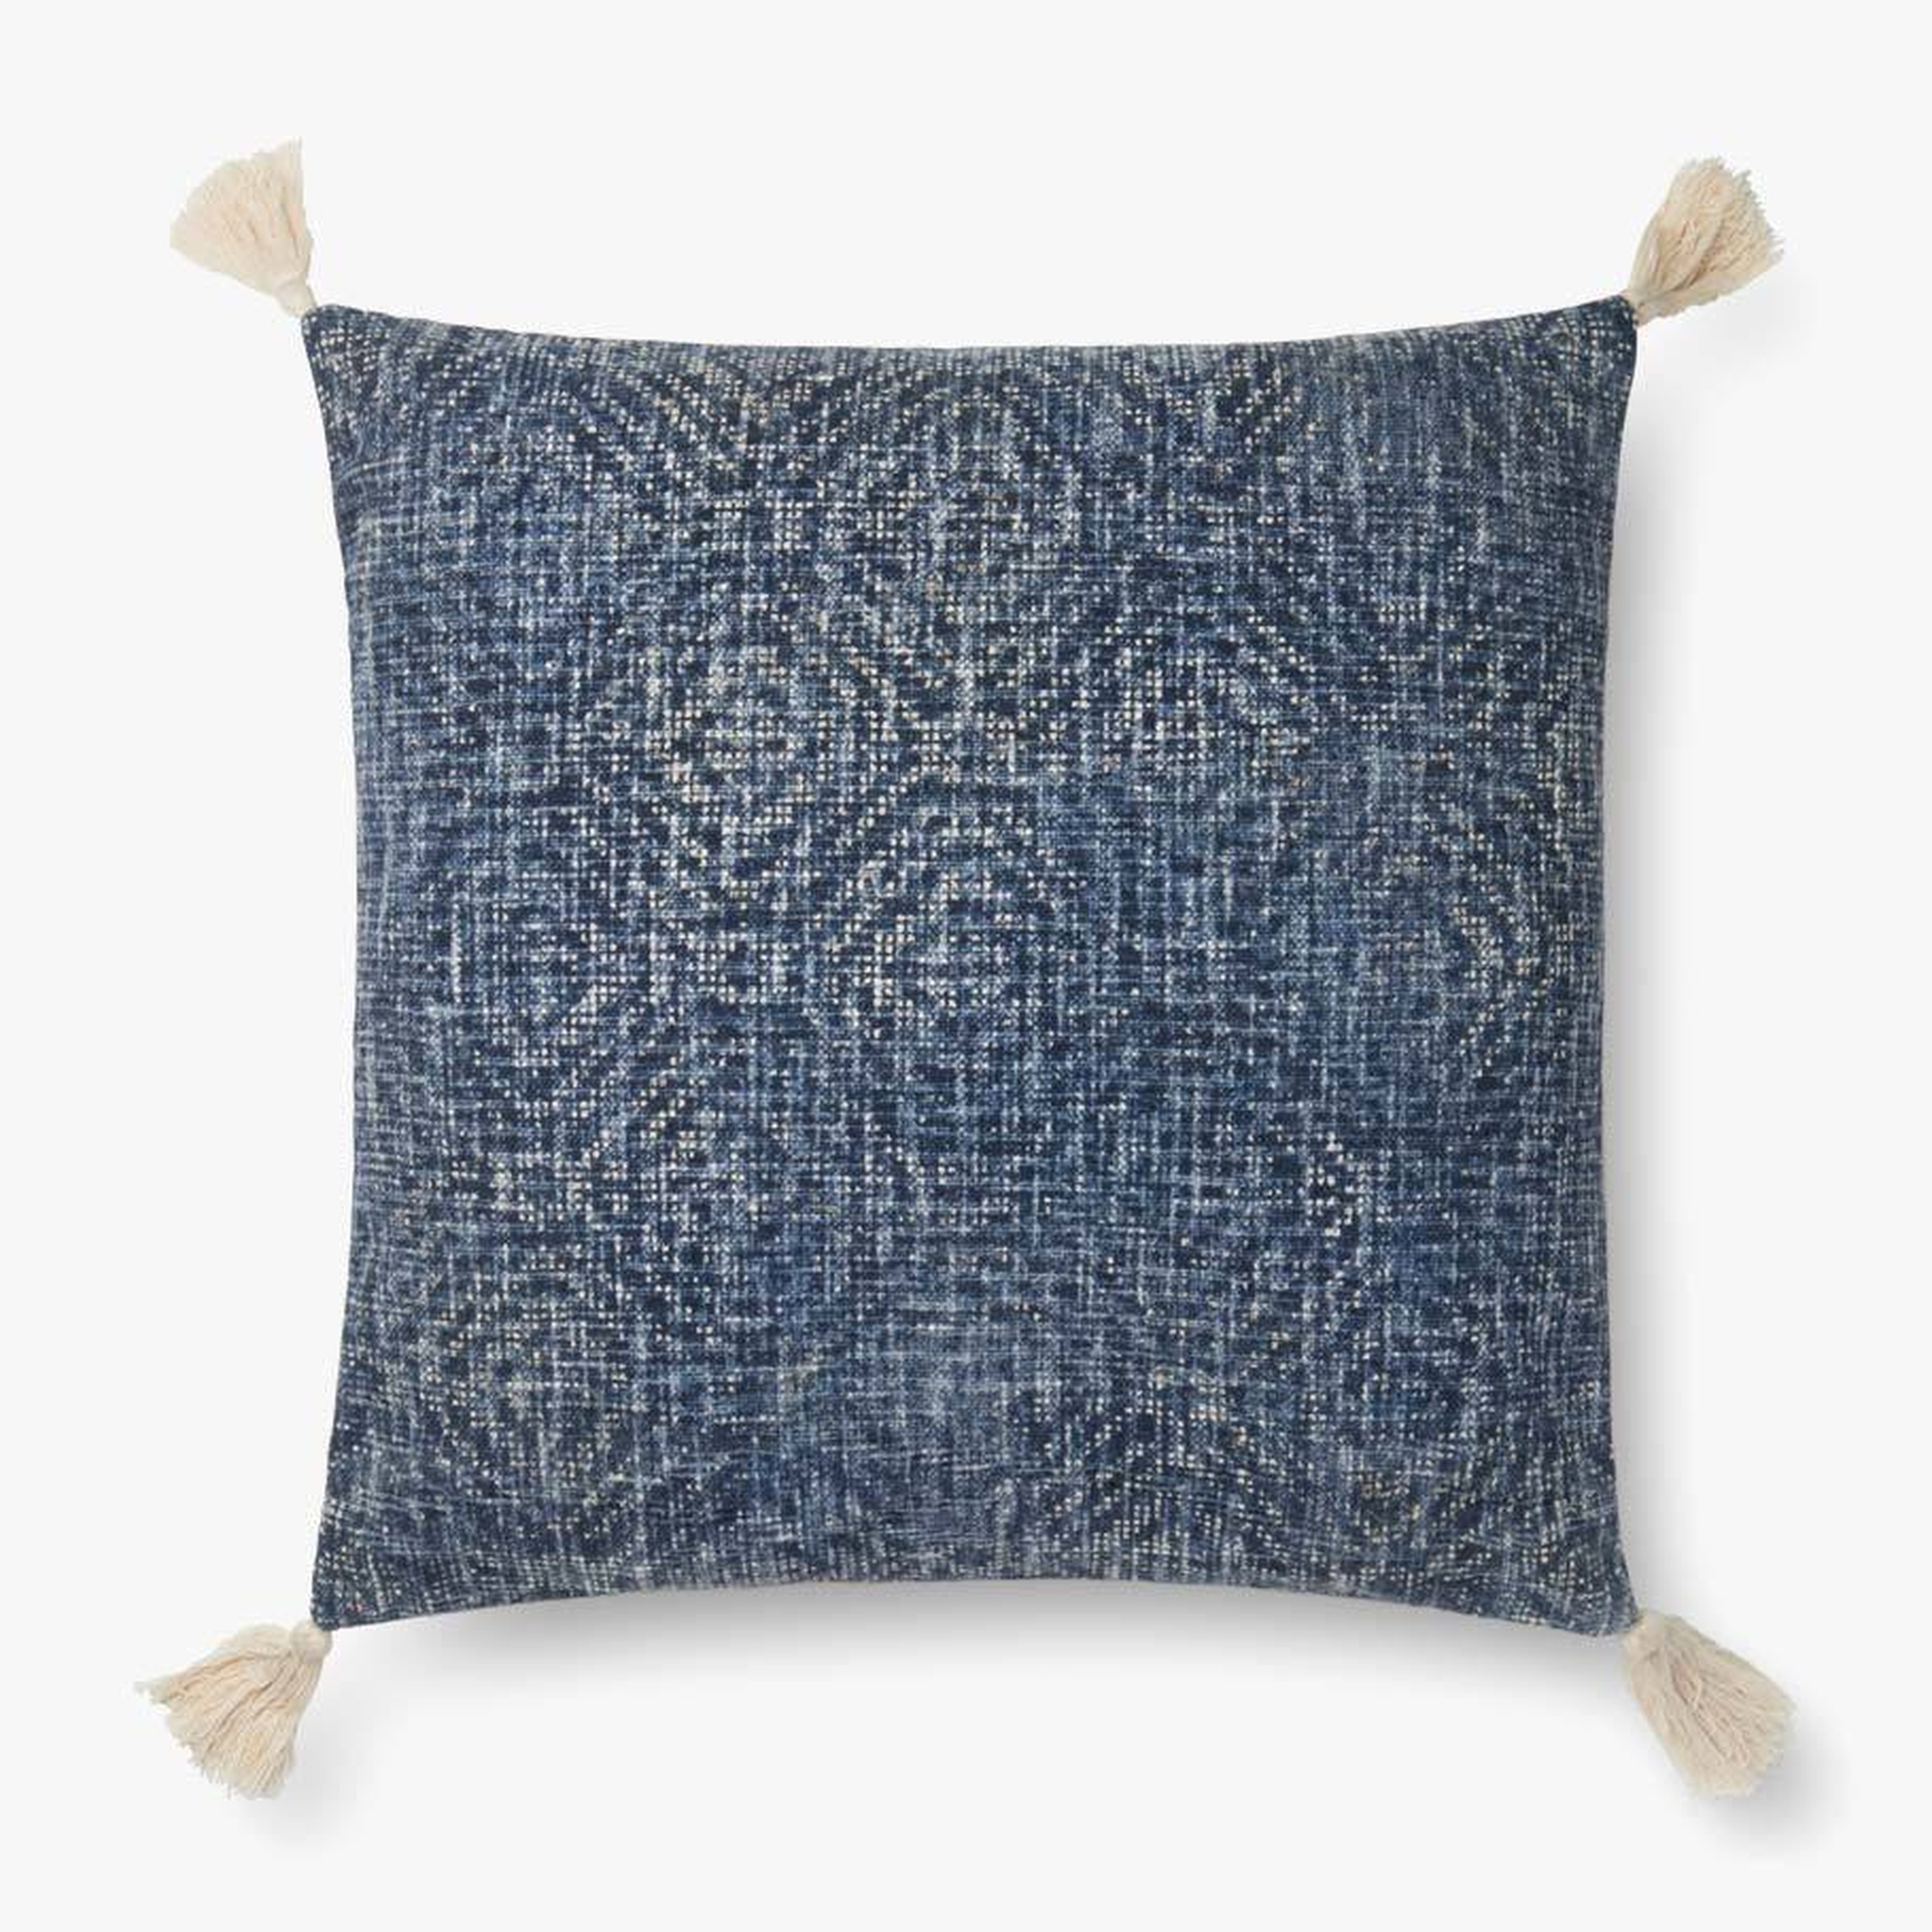 PILLOWS - BLUE - 22" X 22" Poly Fill - Loloi Rugs